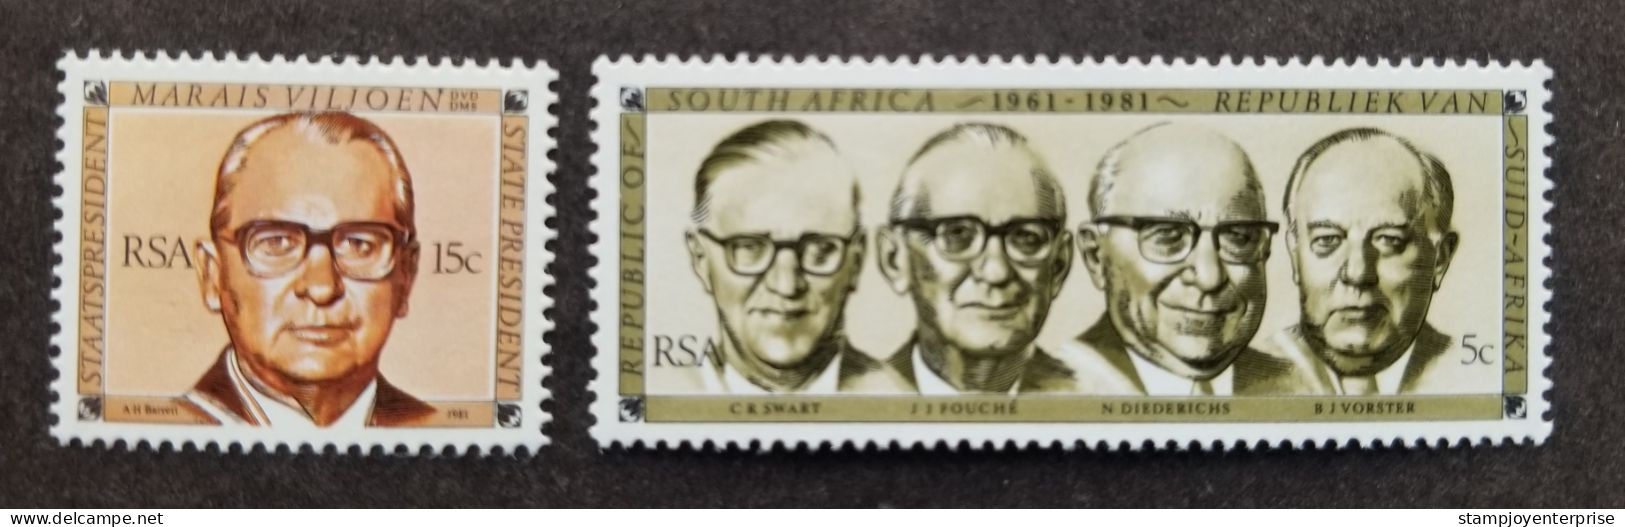 South Africa 20th Anniversary Founding Republic 1981 President (stamp) MNH - Nuevos